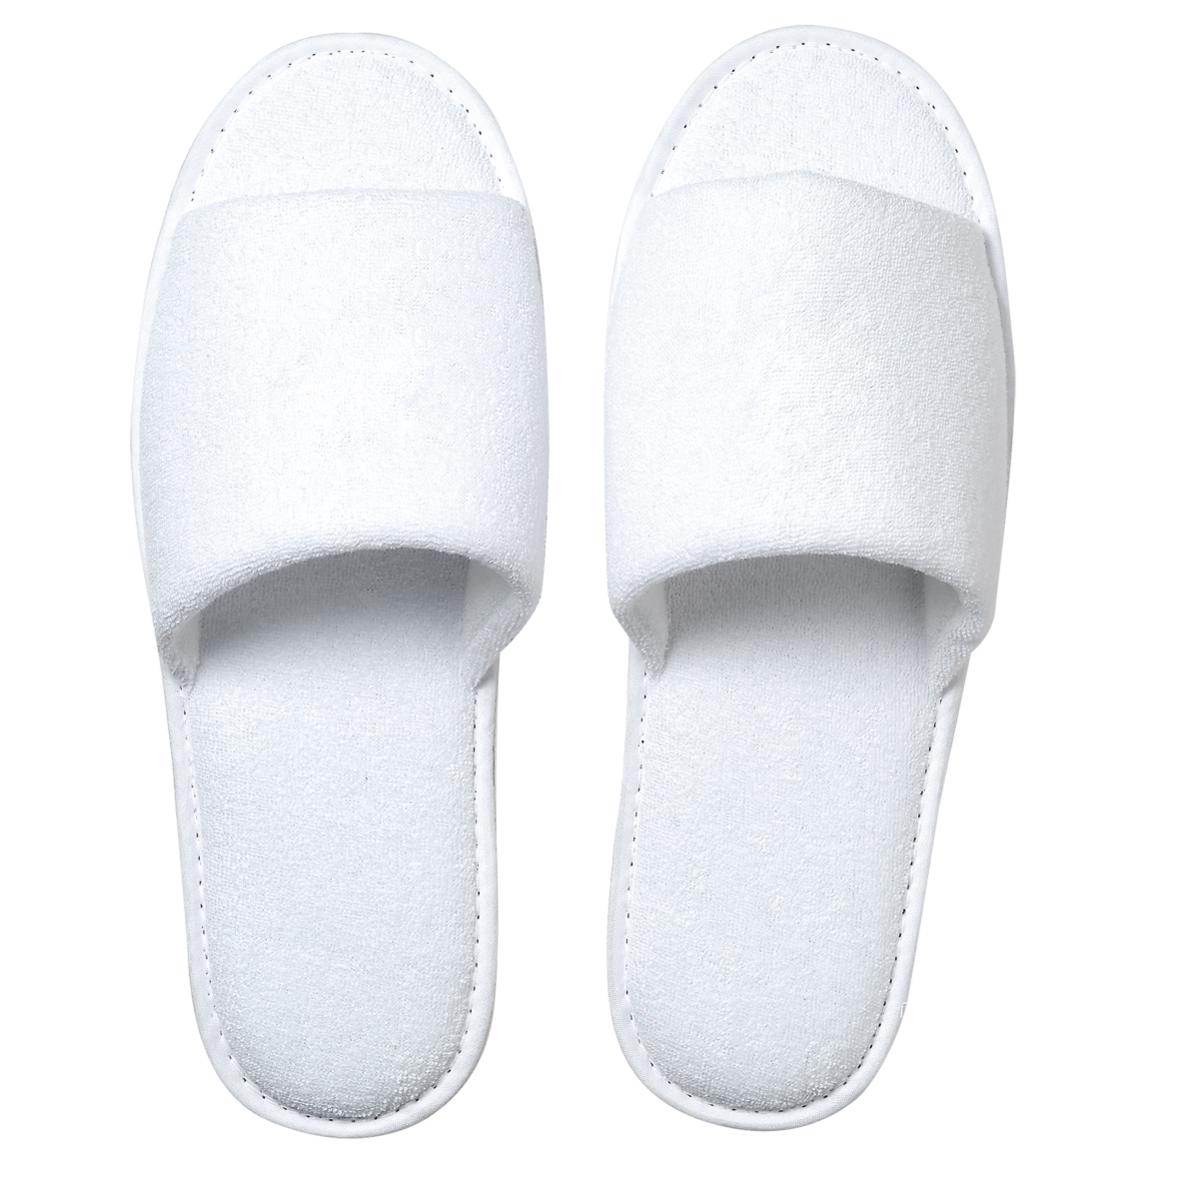 Comfortable Single Size Soft Slippers - Andover